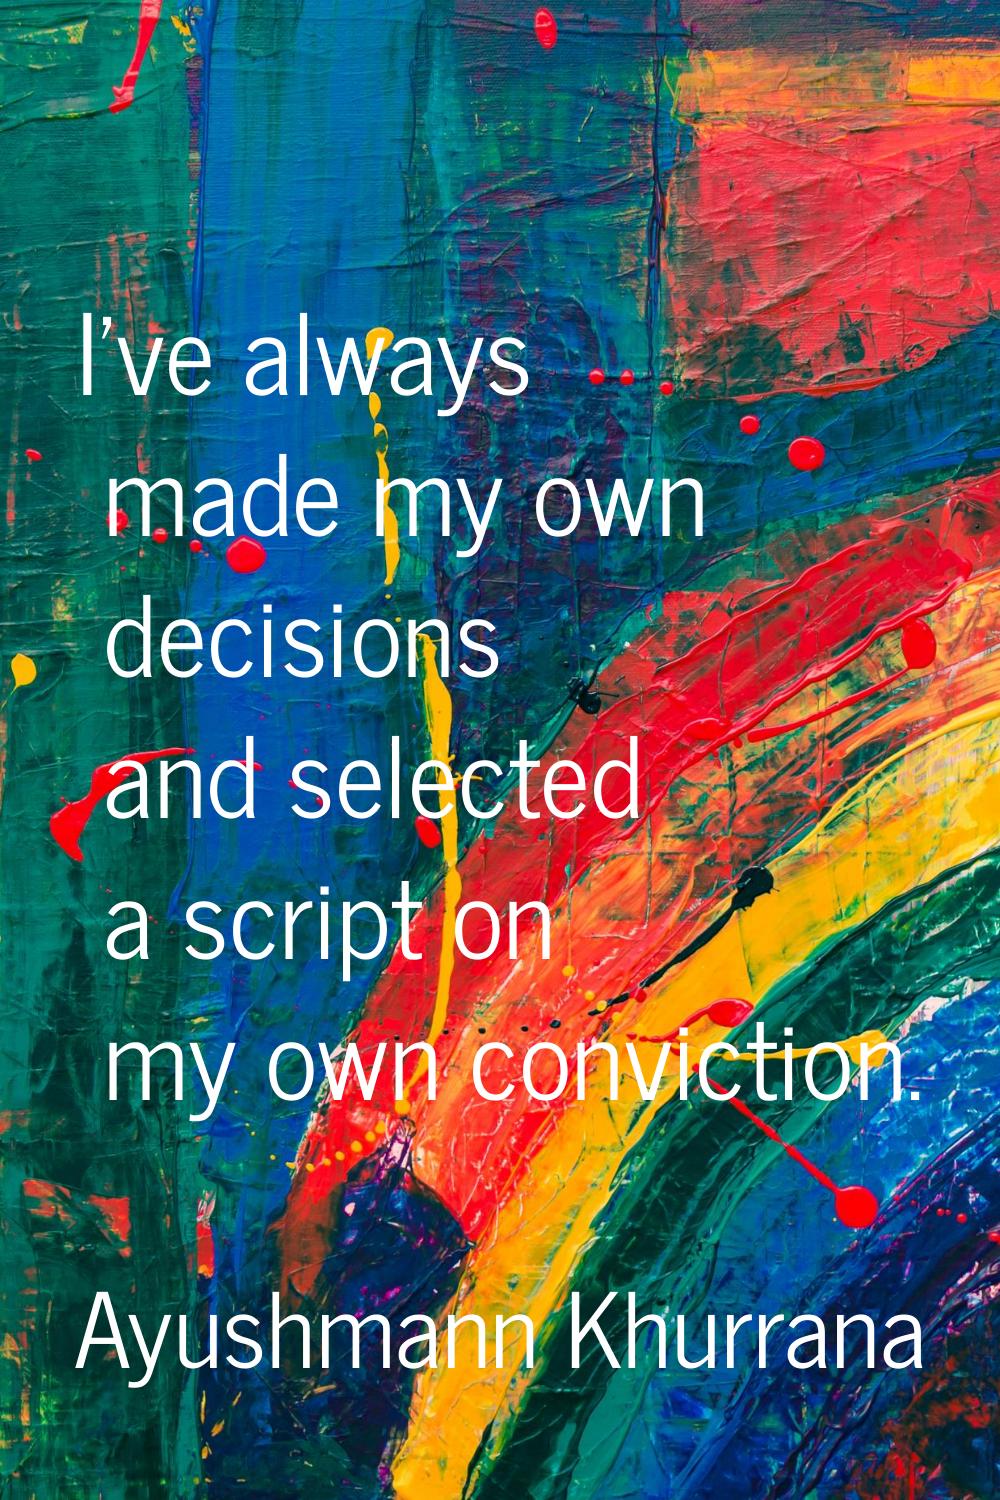 I've always made my own decisions and selected a script on my own conviction.